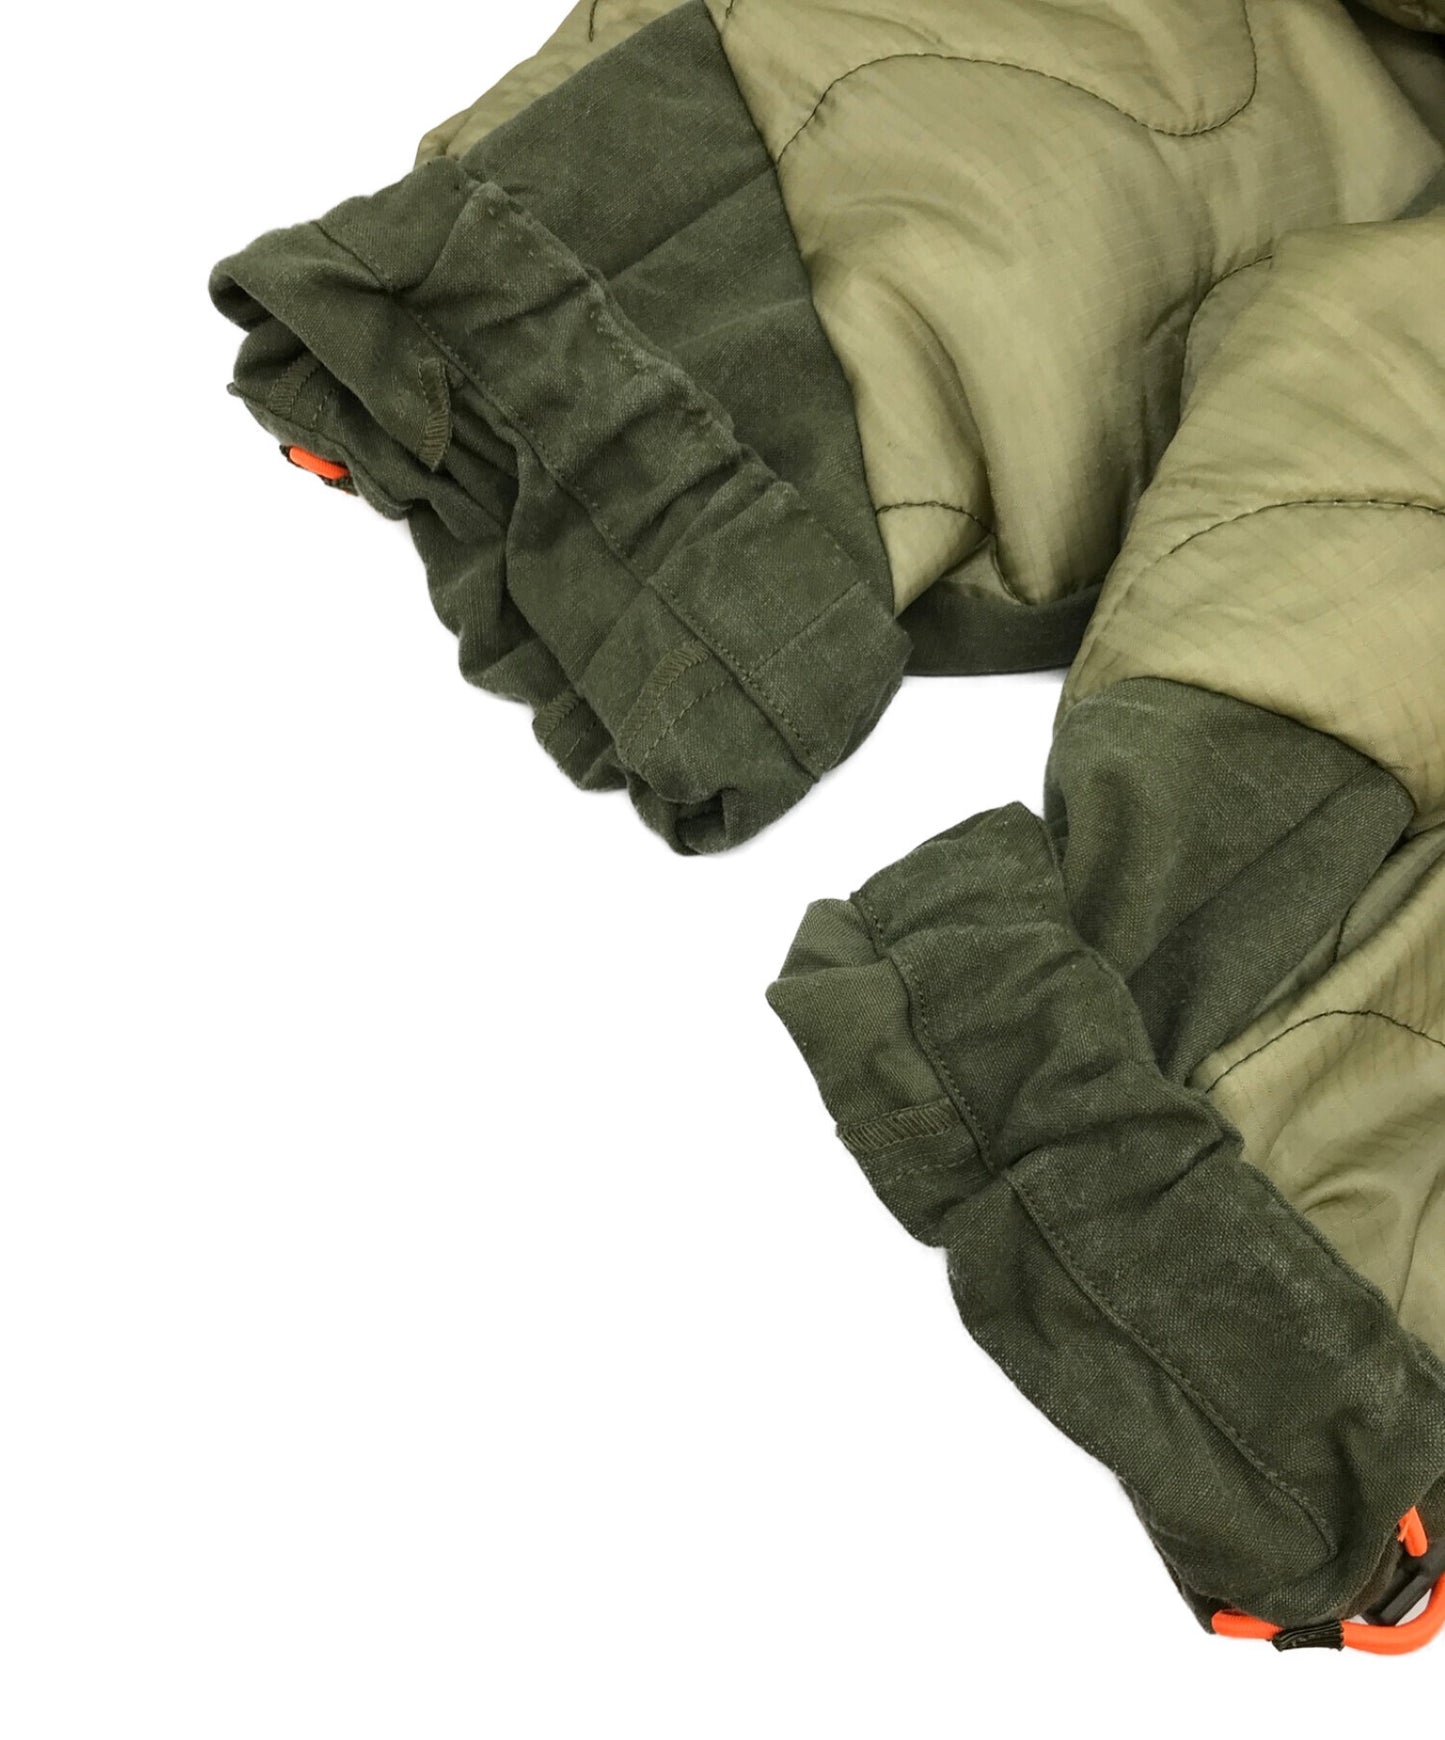 [Pre-owned] READYMADE Liner Tactical Pants Pants RE-CO-KH-00-00-115